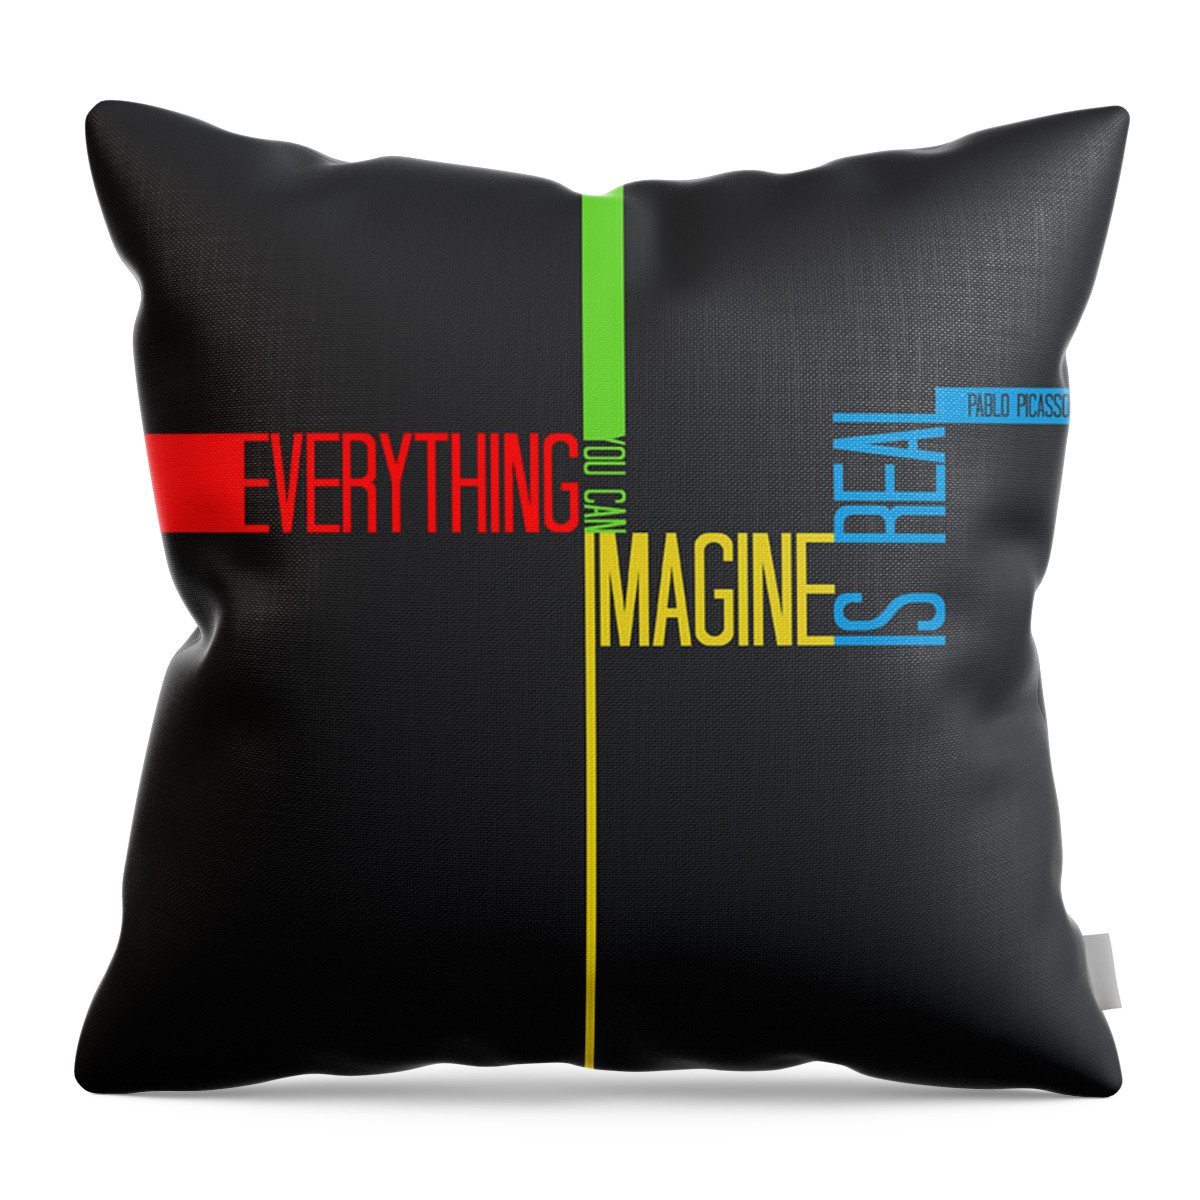  Throw Pillow featuring the digital art Everything you Imagine Poster by Naxart Studio